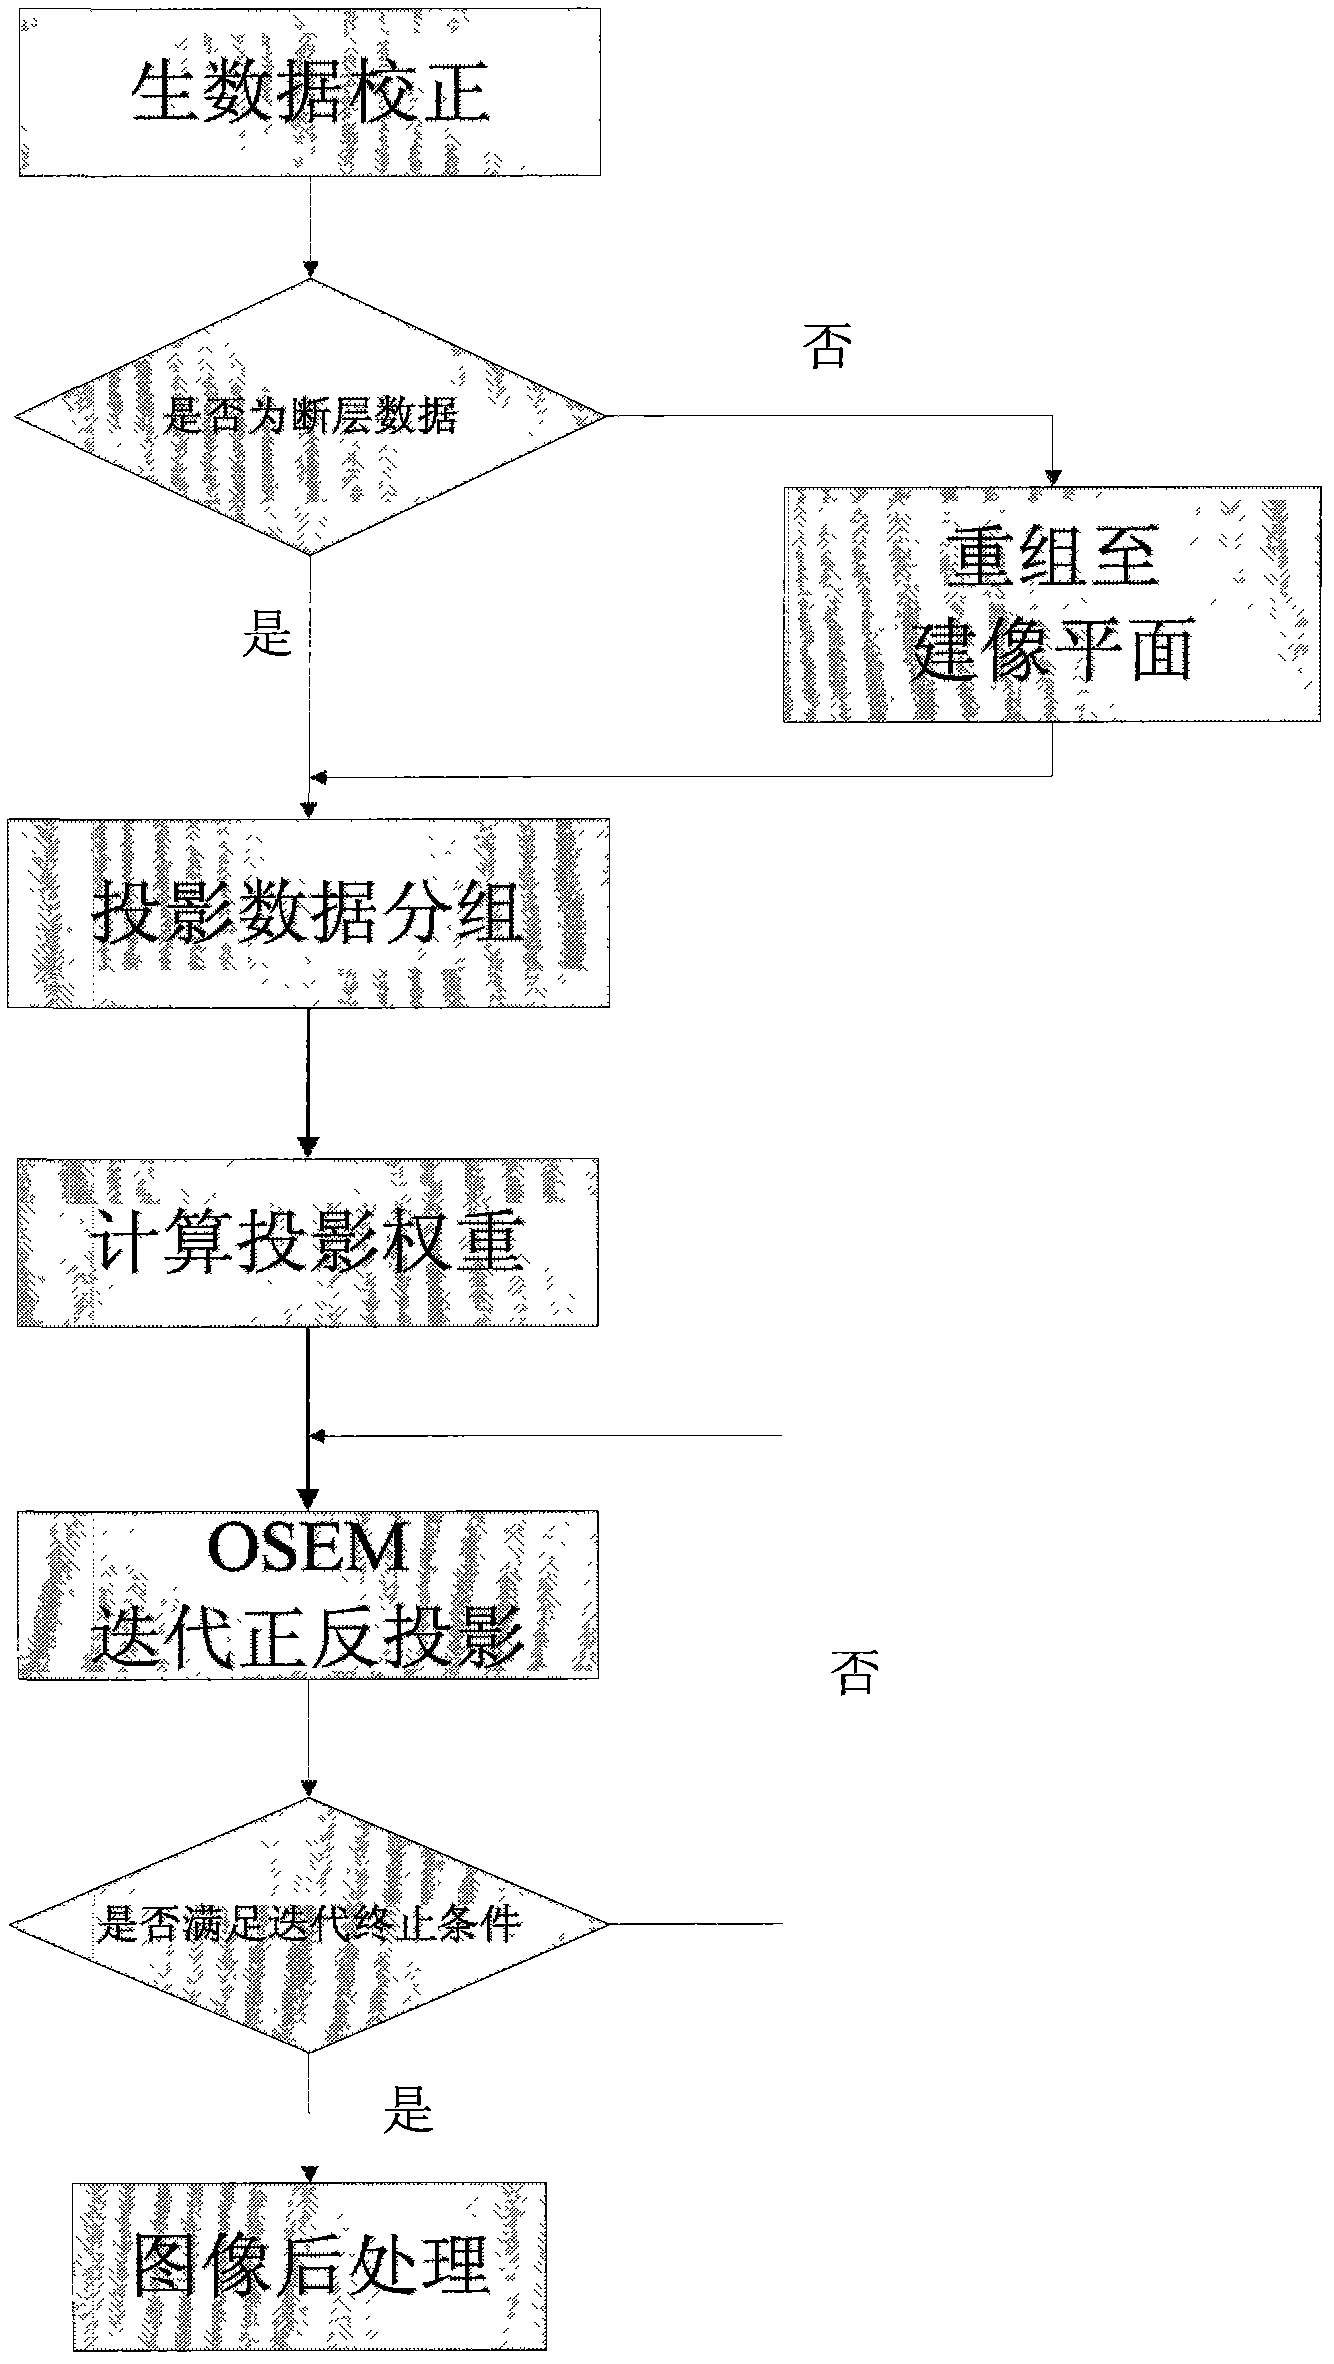 Computed tomography (CT) iteration reconstruction method for asymmetrical detector